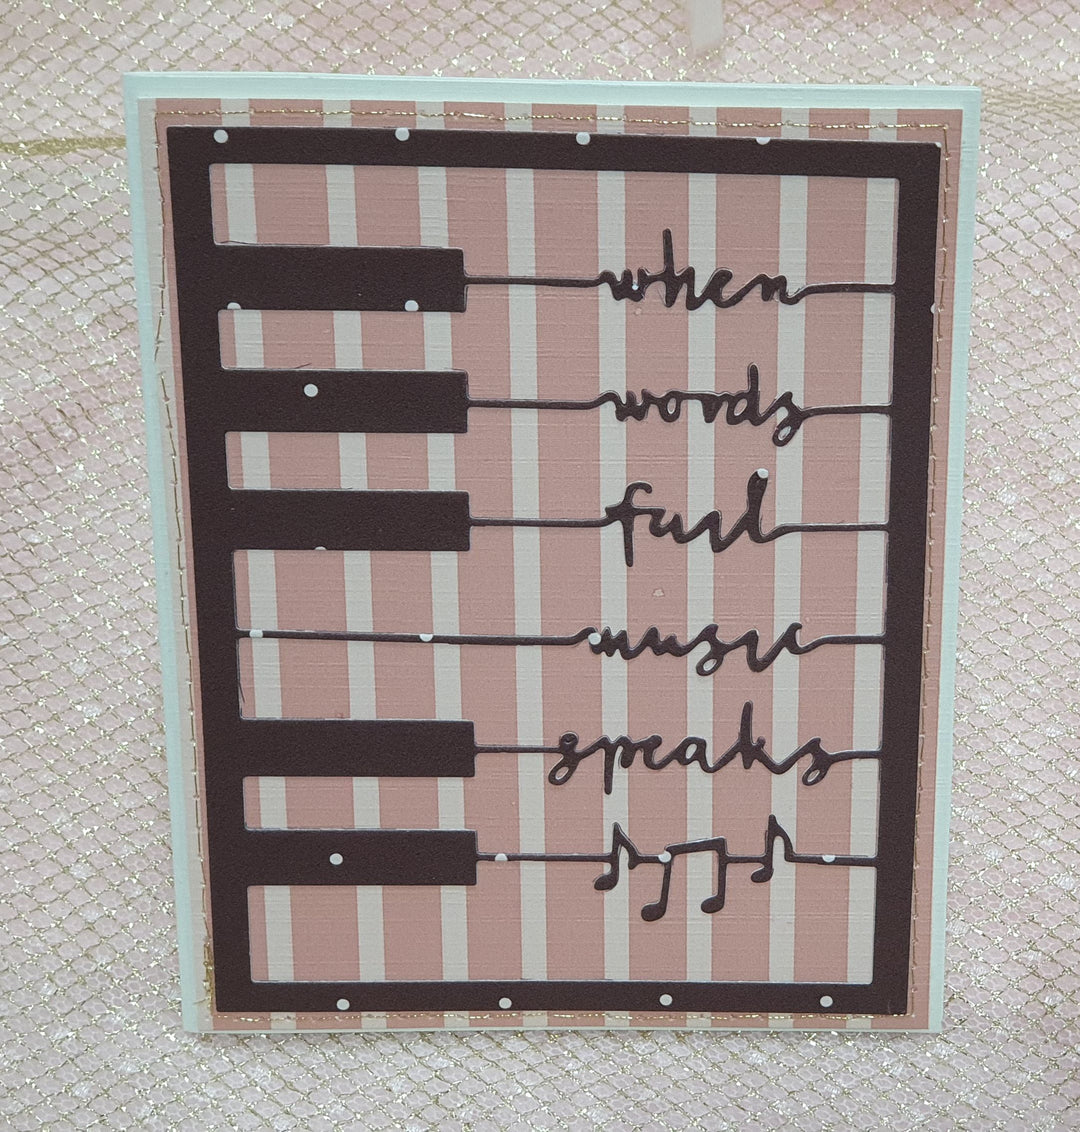 Kokorosa Metal Cutting Dies with Piano Background Board & "when words fail music speaks" Word